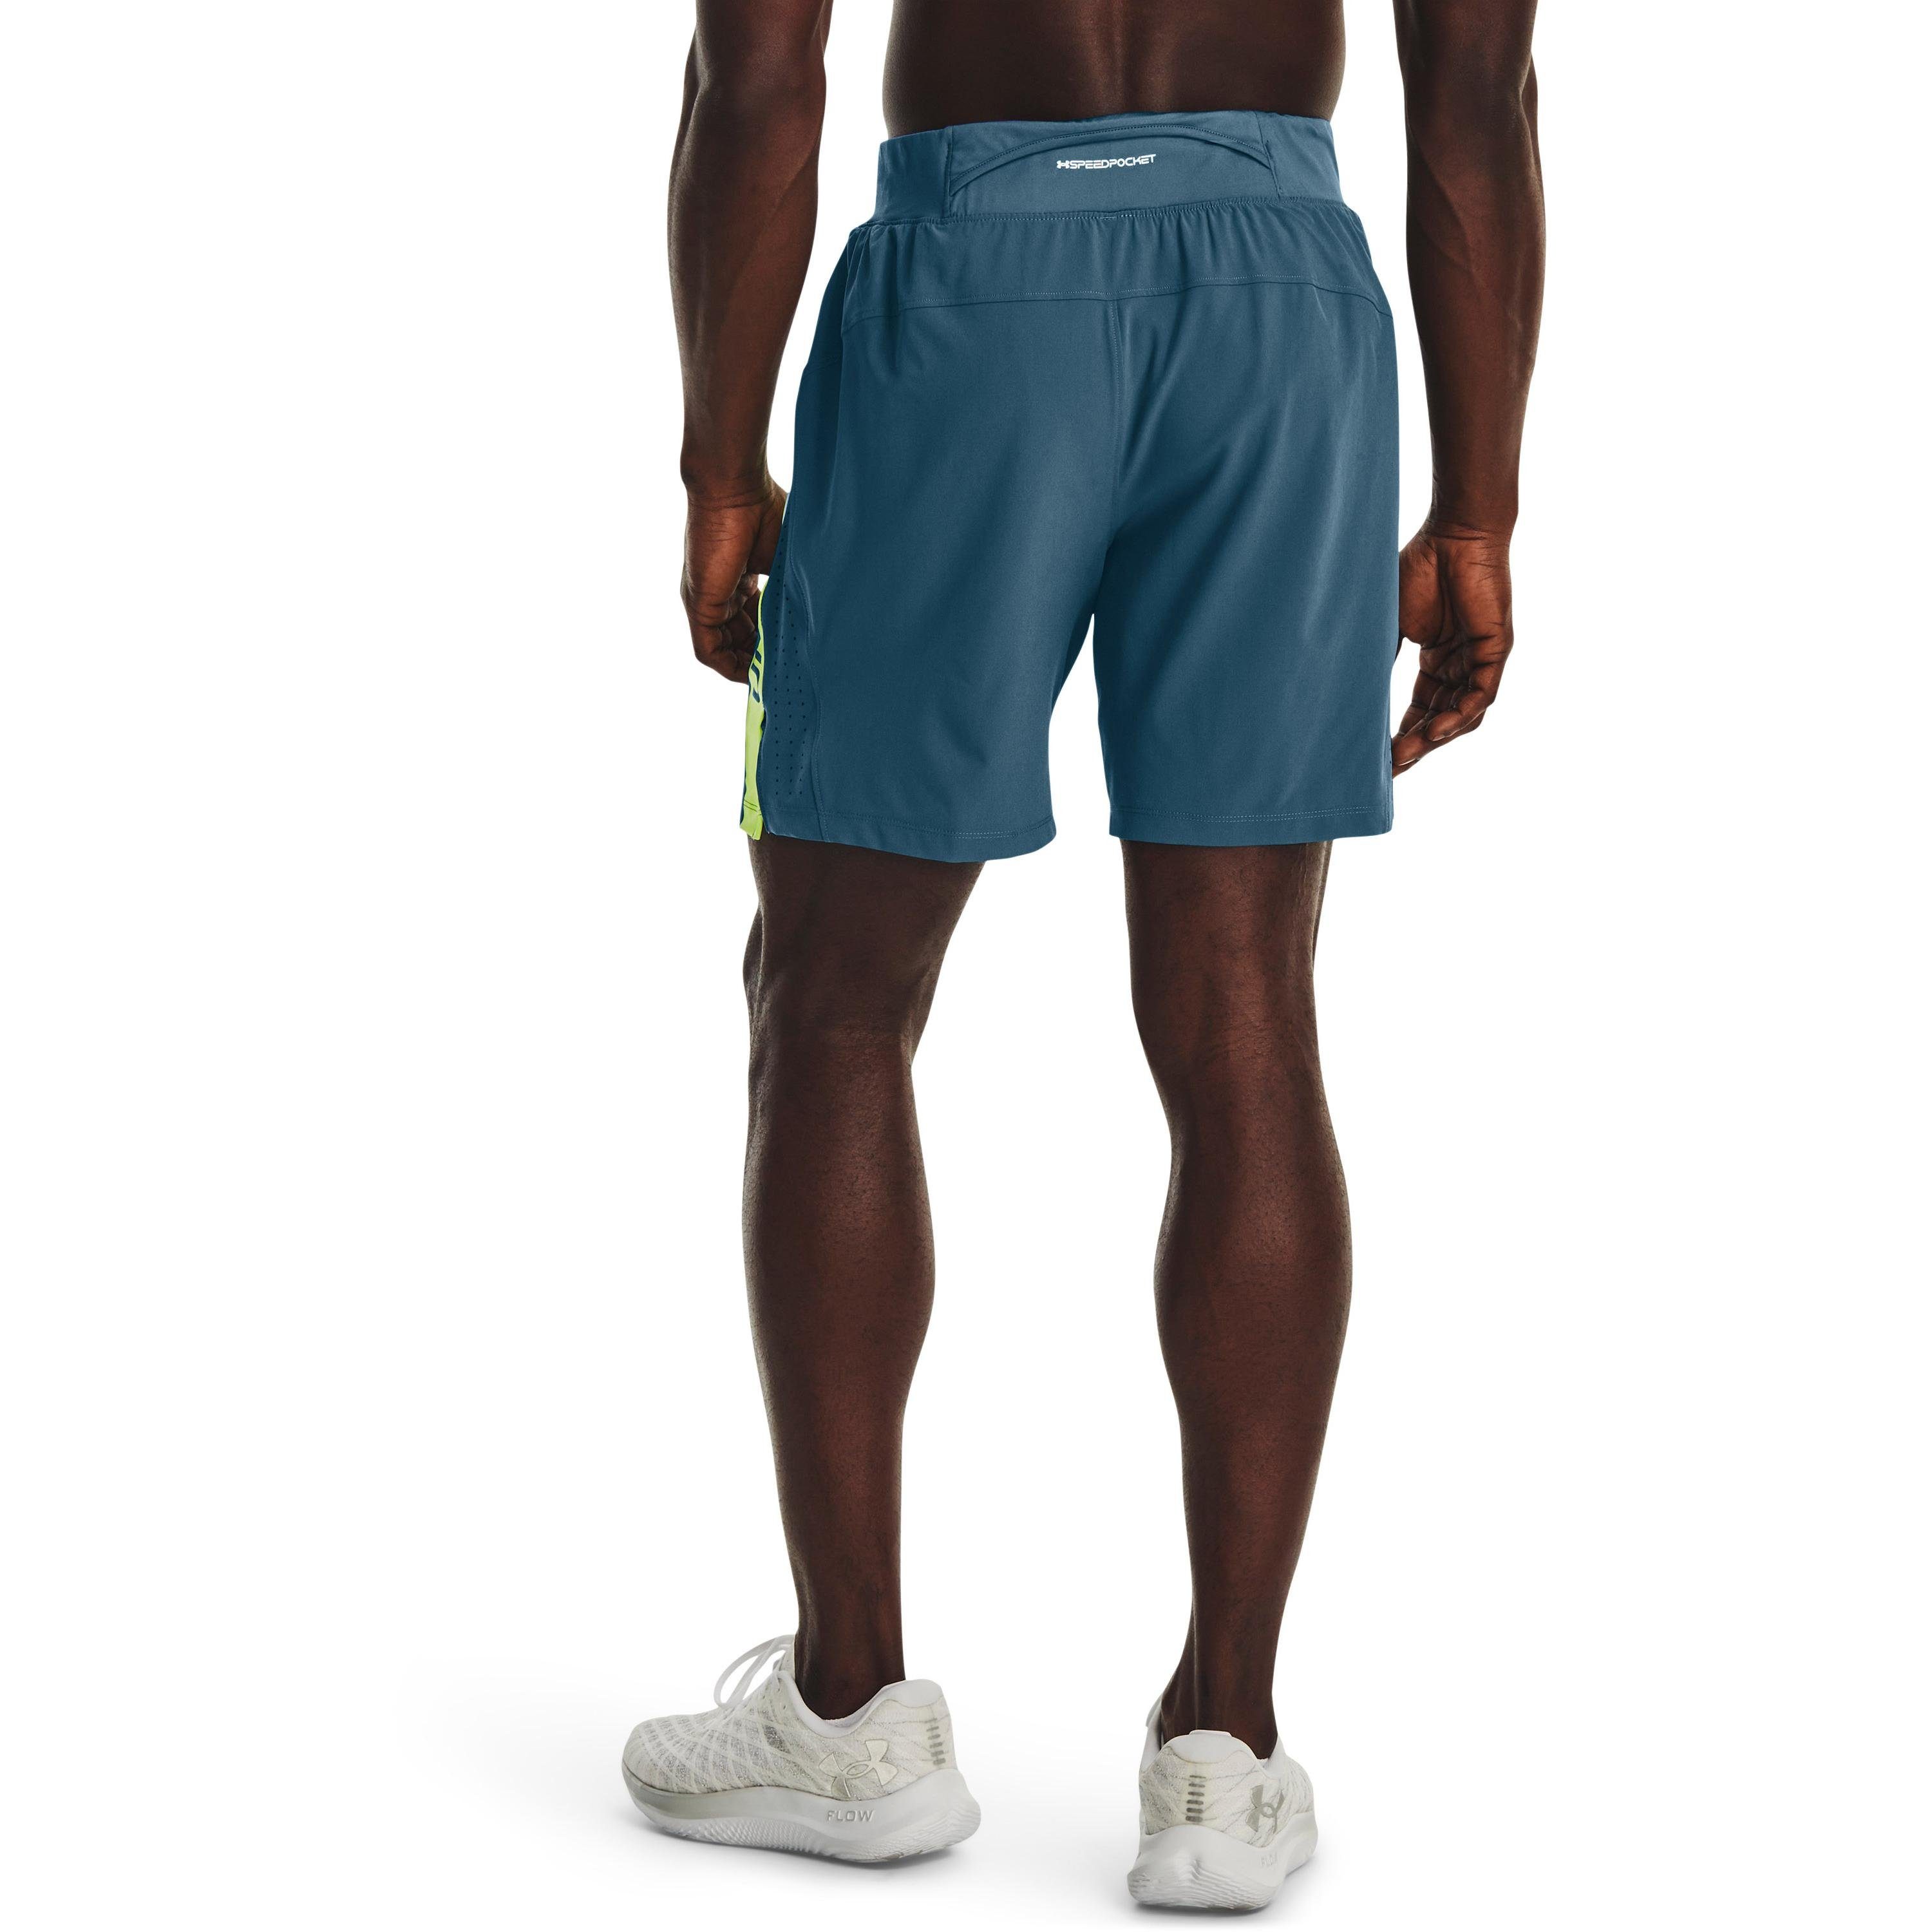 Armour® ELITE Under Blue 414 LAUNCH Funktionsshorts Static